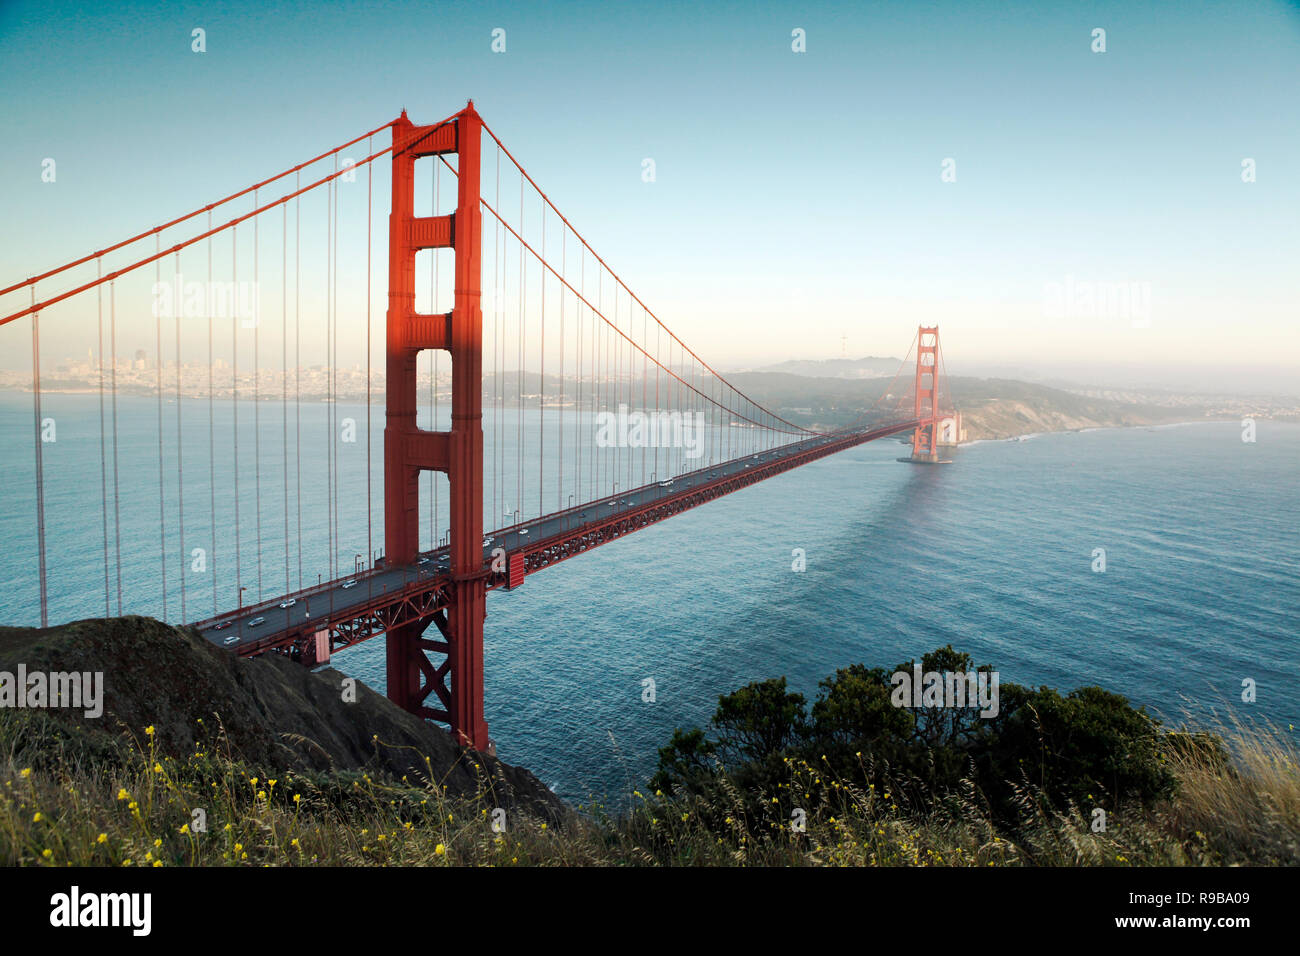 USA, California, San Francisco, the Golden Gate Bridge, view from the North end, the Marin Headlands Stock Photo